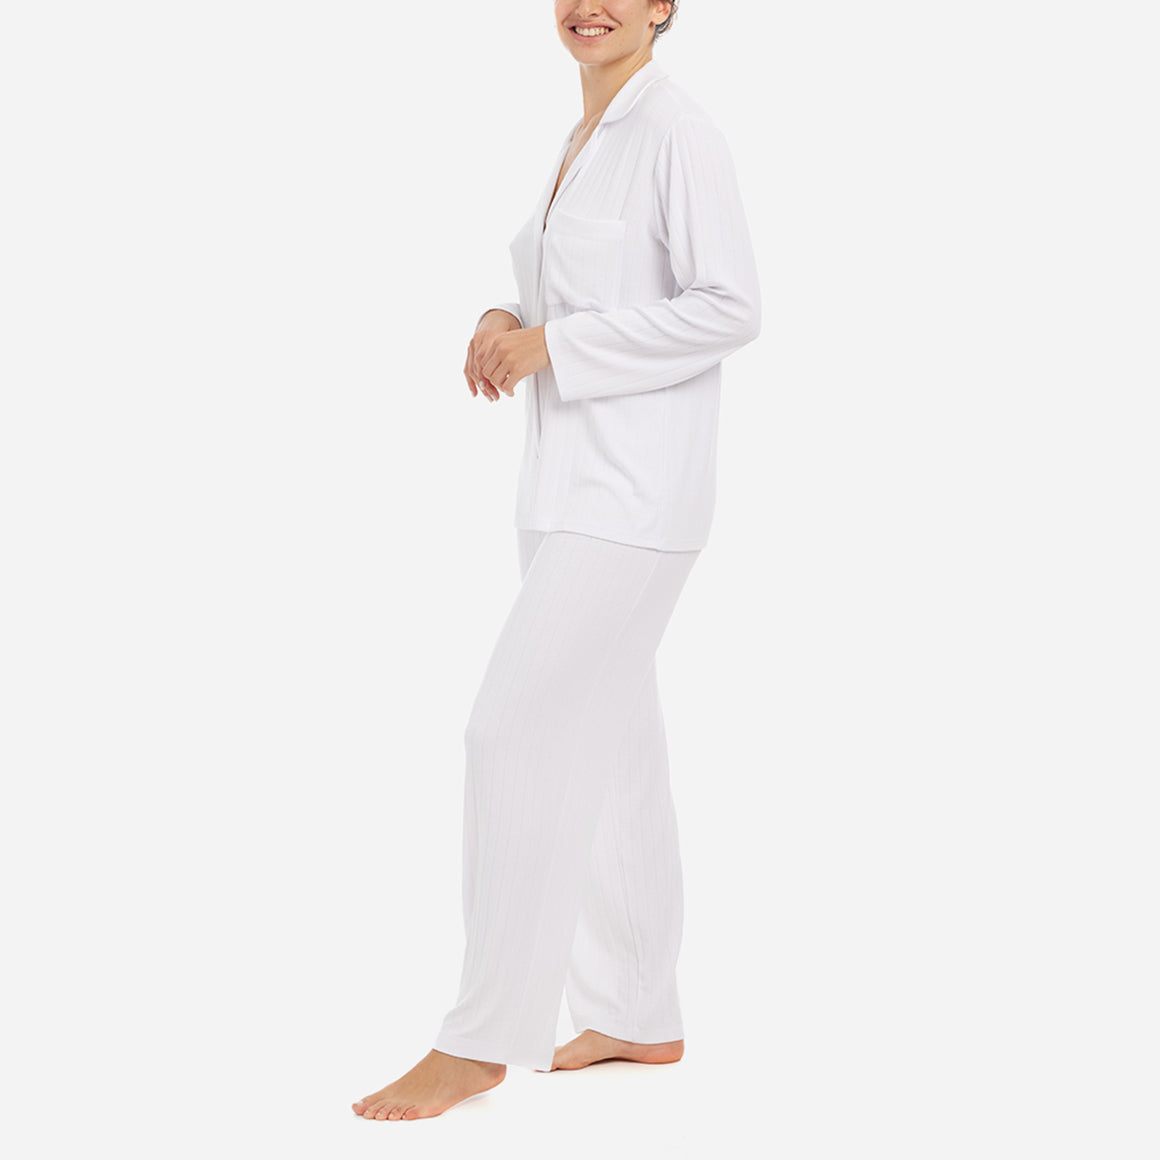 The classic yet contemporary silhouette flatters all body types, and its relaxed fit allows for unrestricted movement and maximum comfort, ensuring you wake up feeling refreshed and rejuvenated. The button-down top exudes sophistication, while the notched collar adds a touch of refinement. The matching low-rise straight leg pants offer a modern and flattering look, while the elastic waistband provides a customized fit.